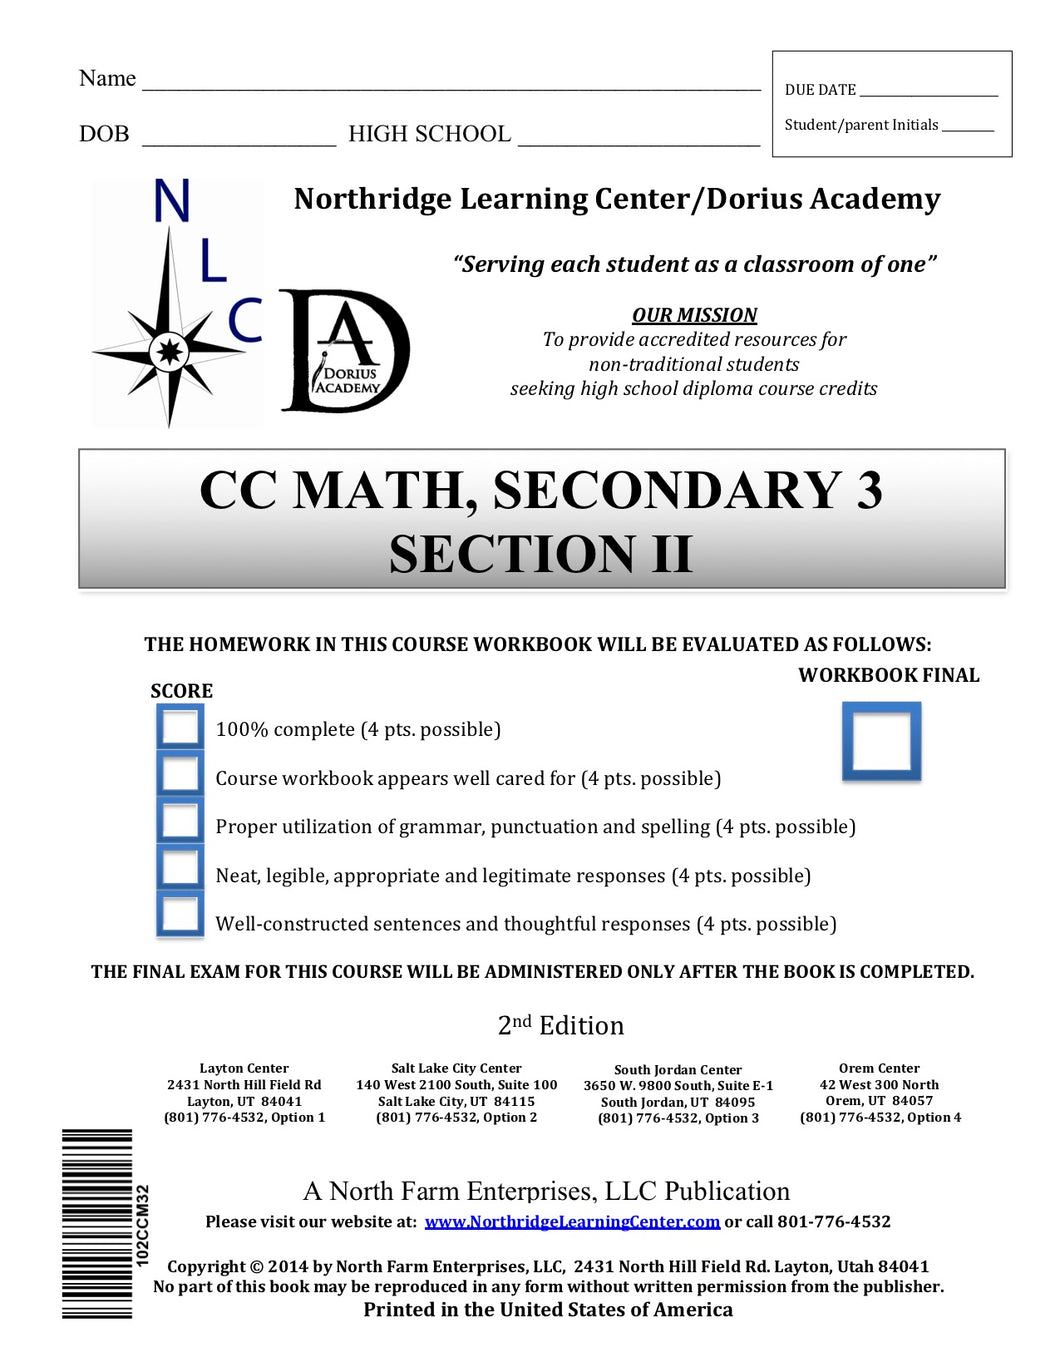 CC Math, Secondary 3, Section II